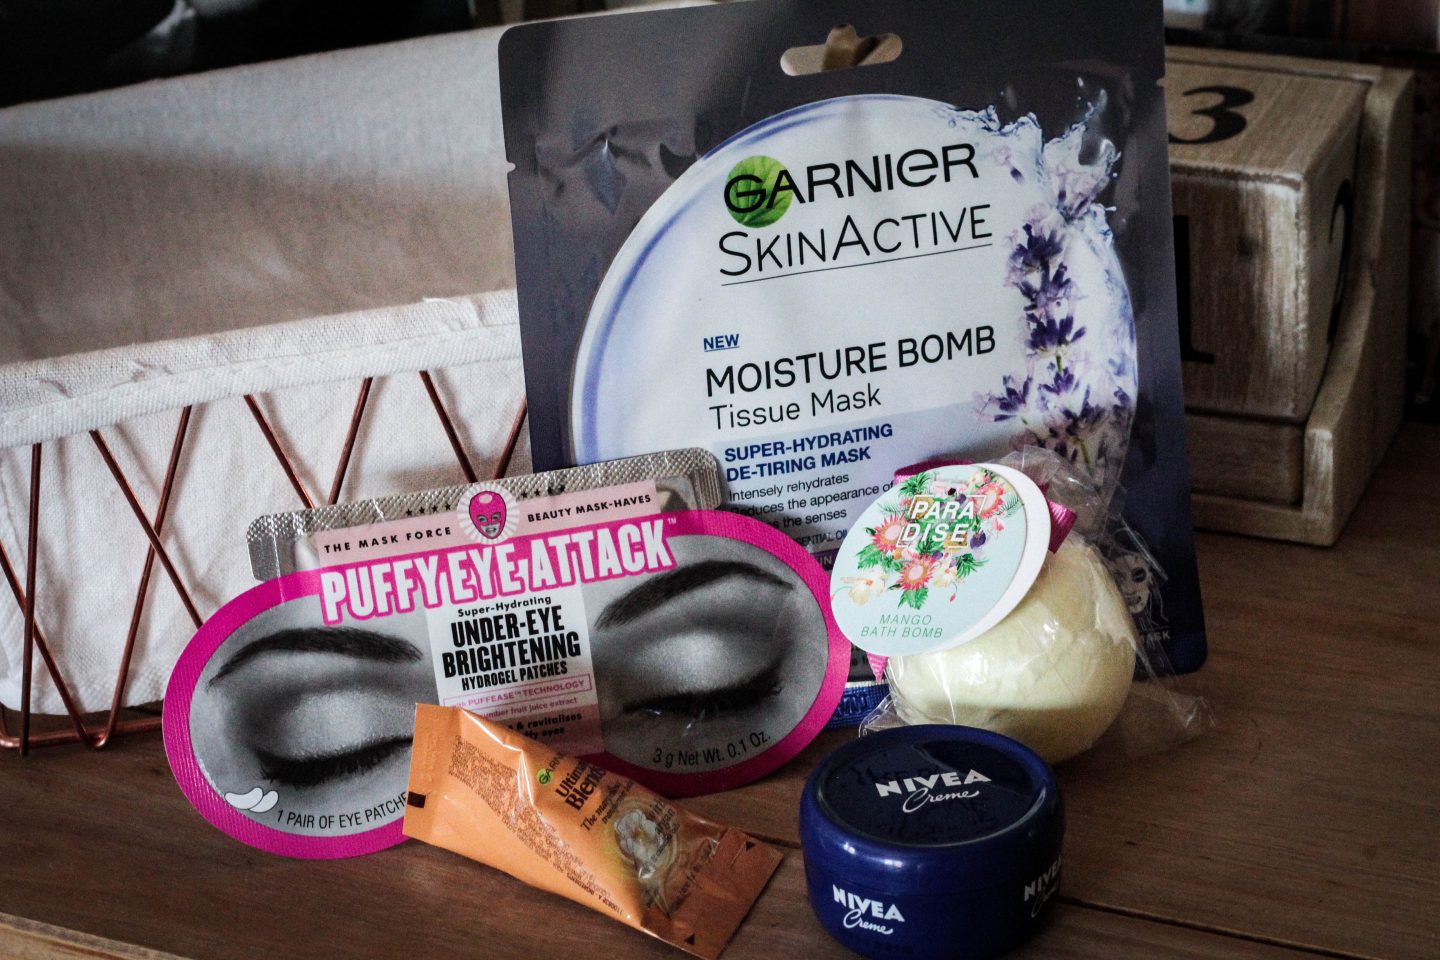 Pamper night products